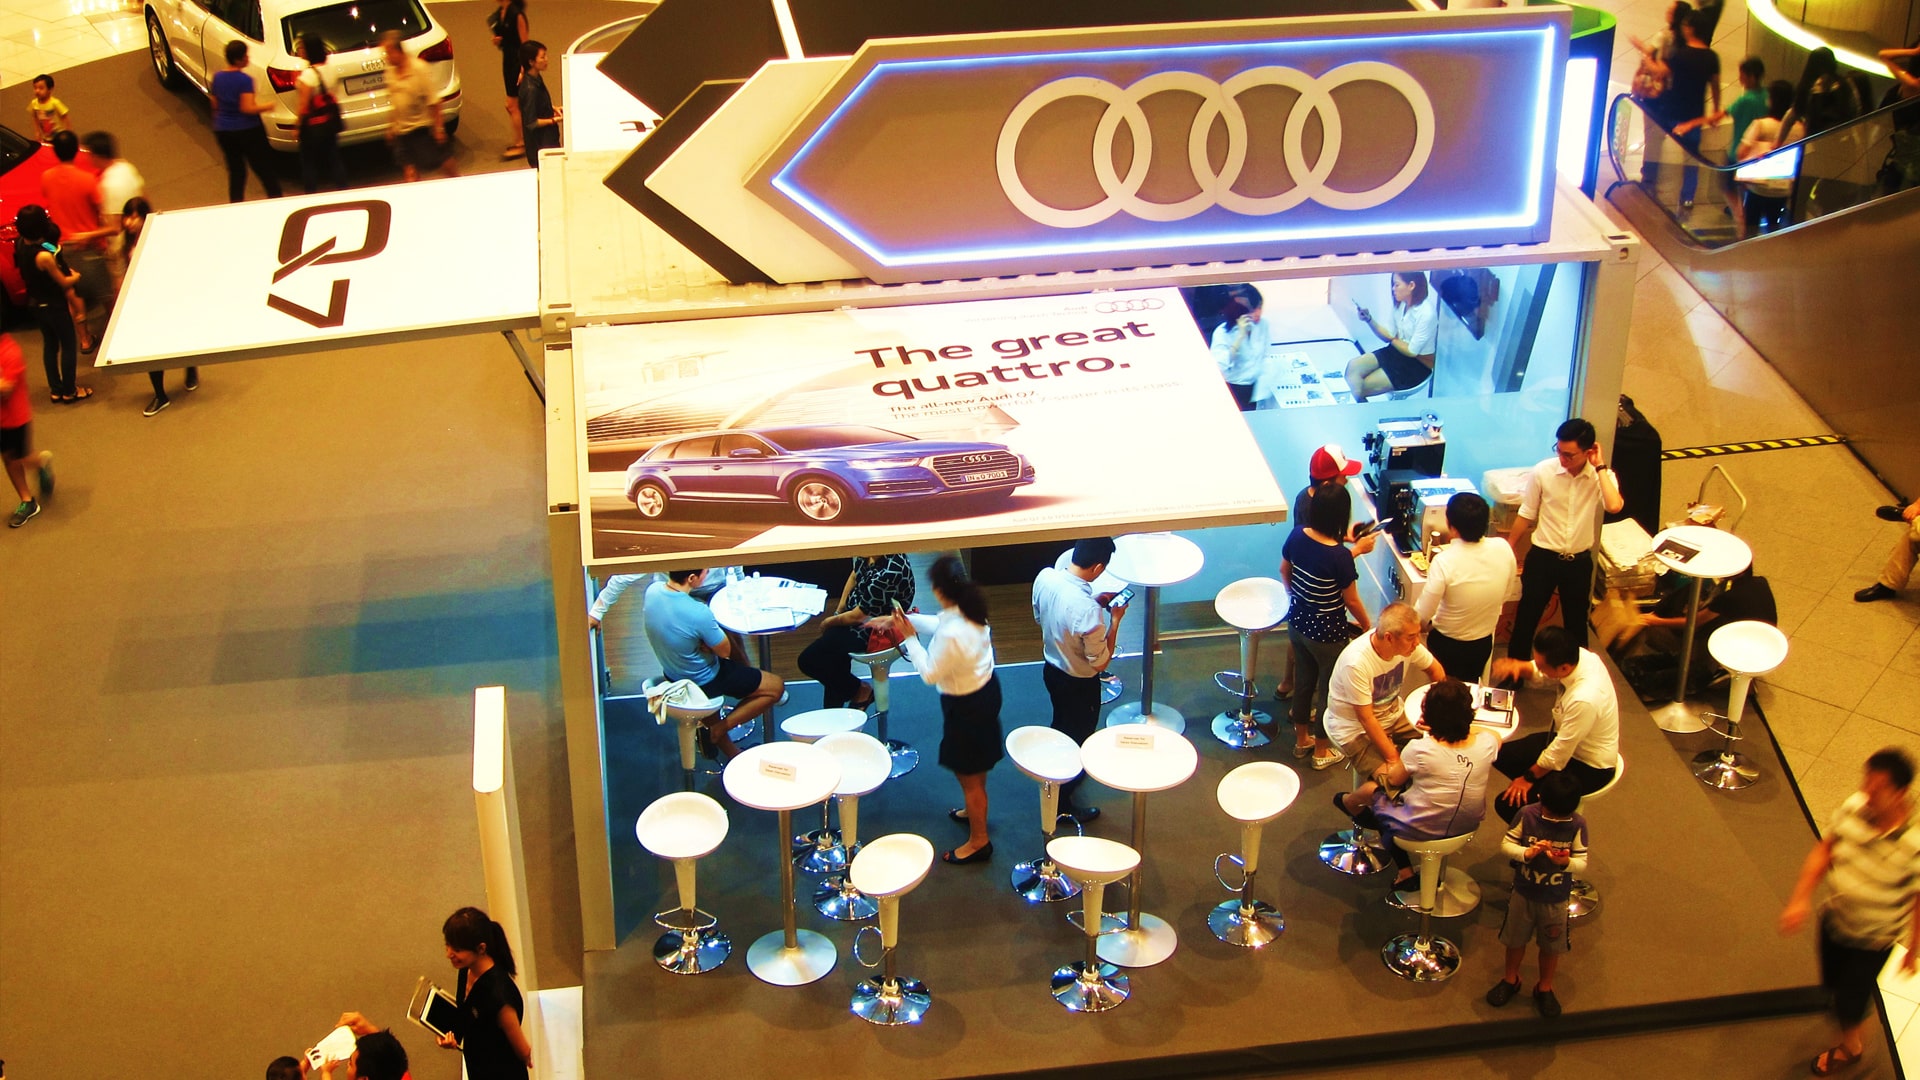 tsc_opt-images_customized-containers_audi-car-launch-1920x1080-03-min